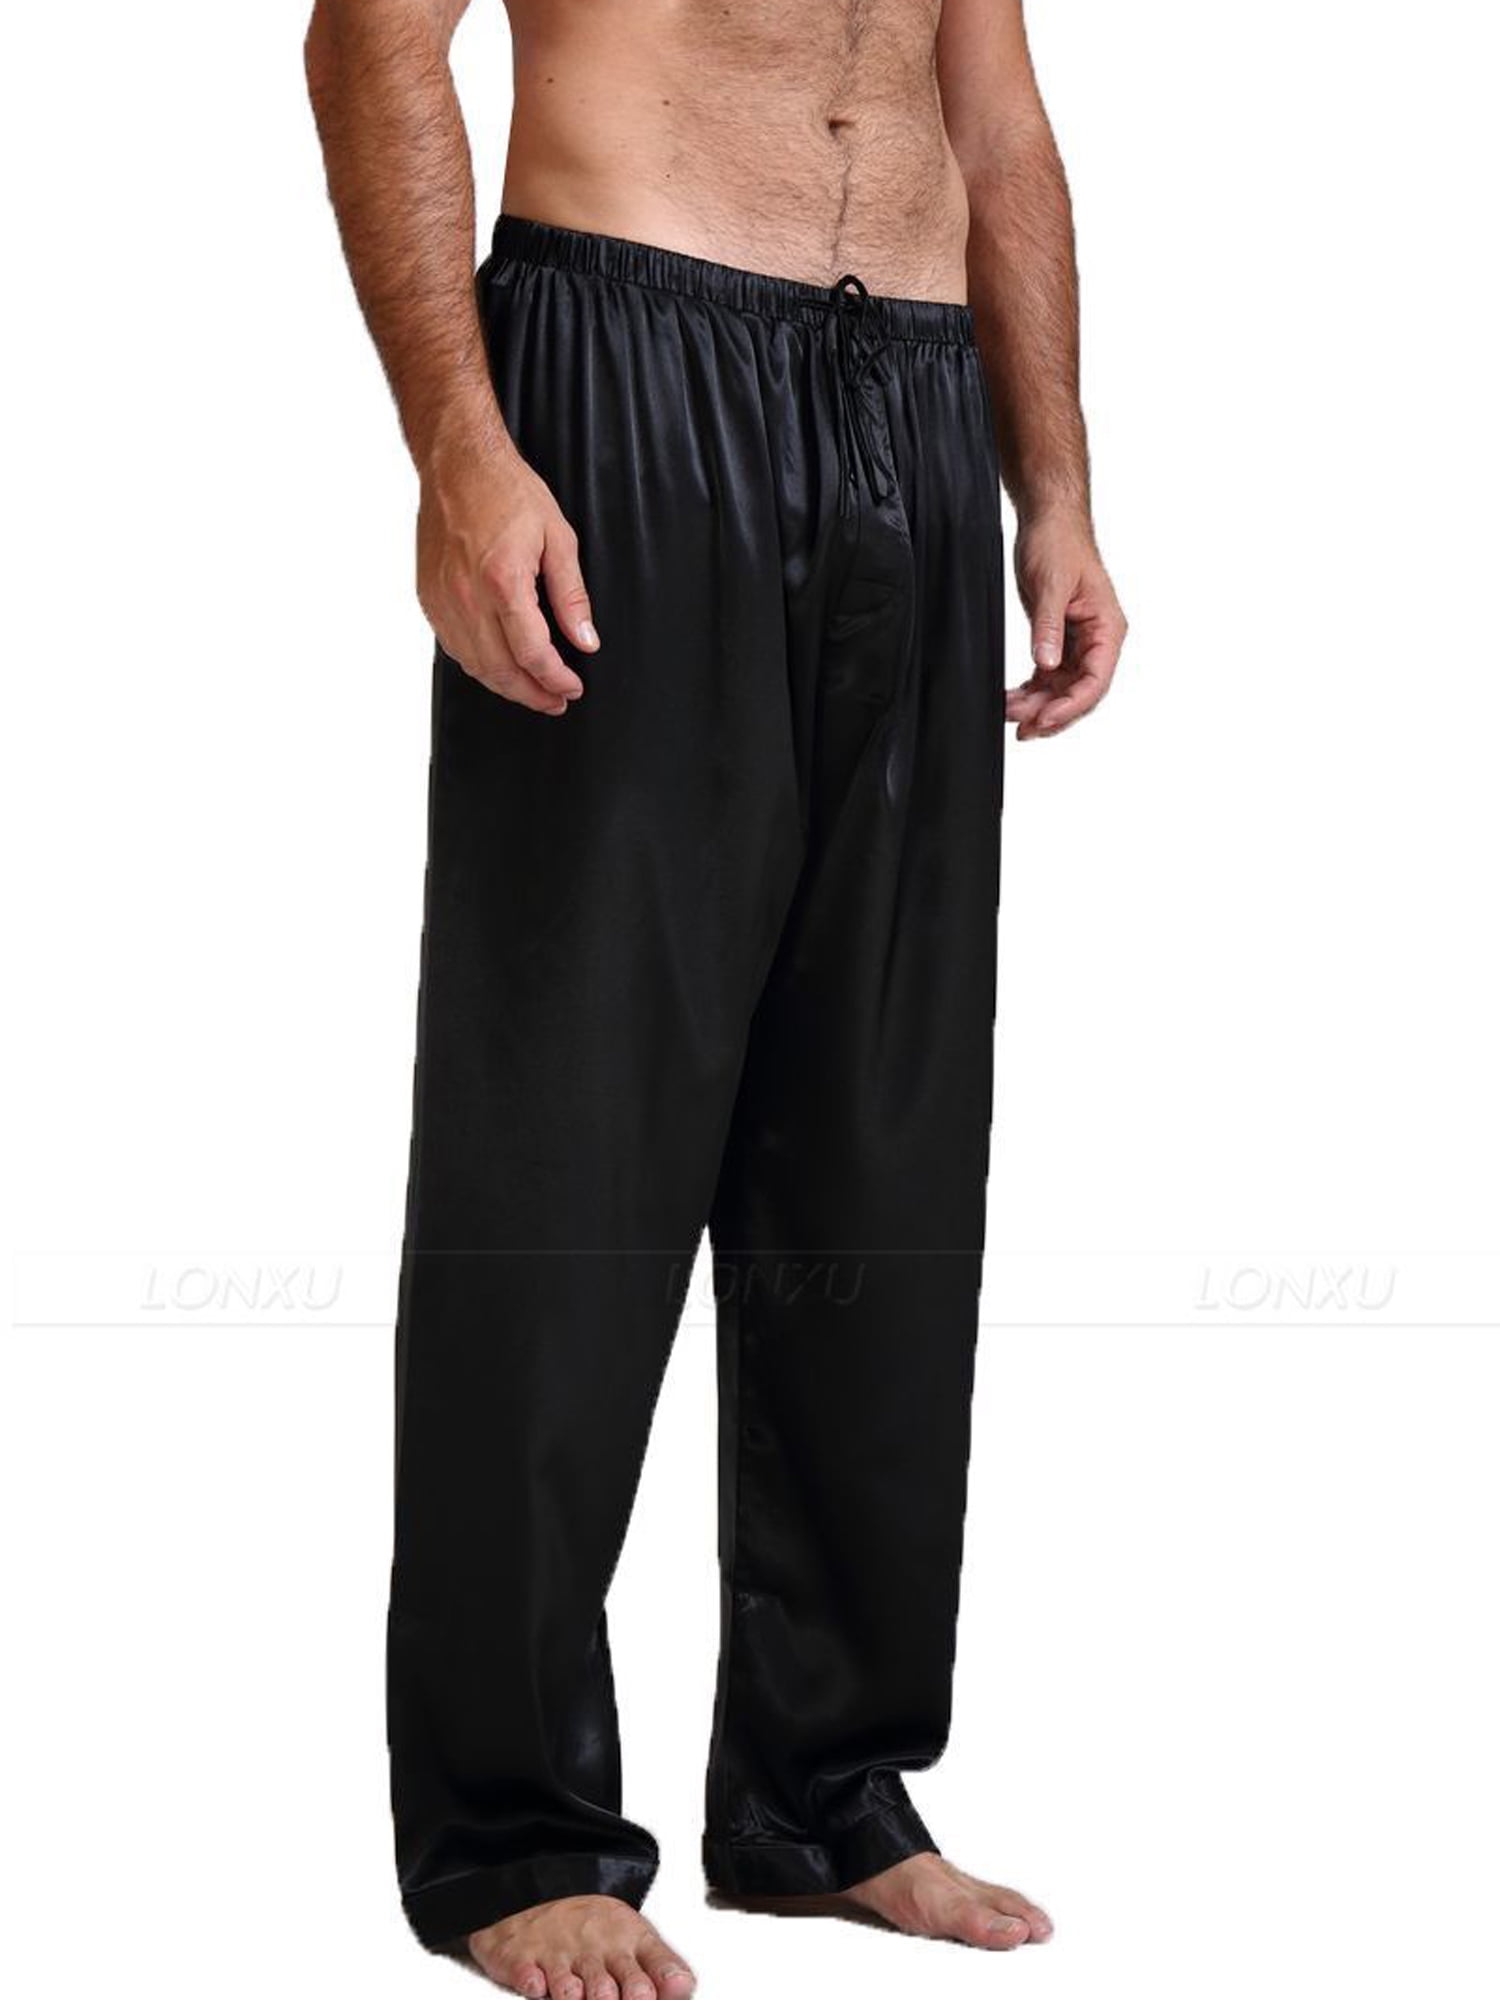 Mens Black Satin Jeans Manufacturer Supplier from Thane India